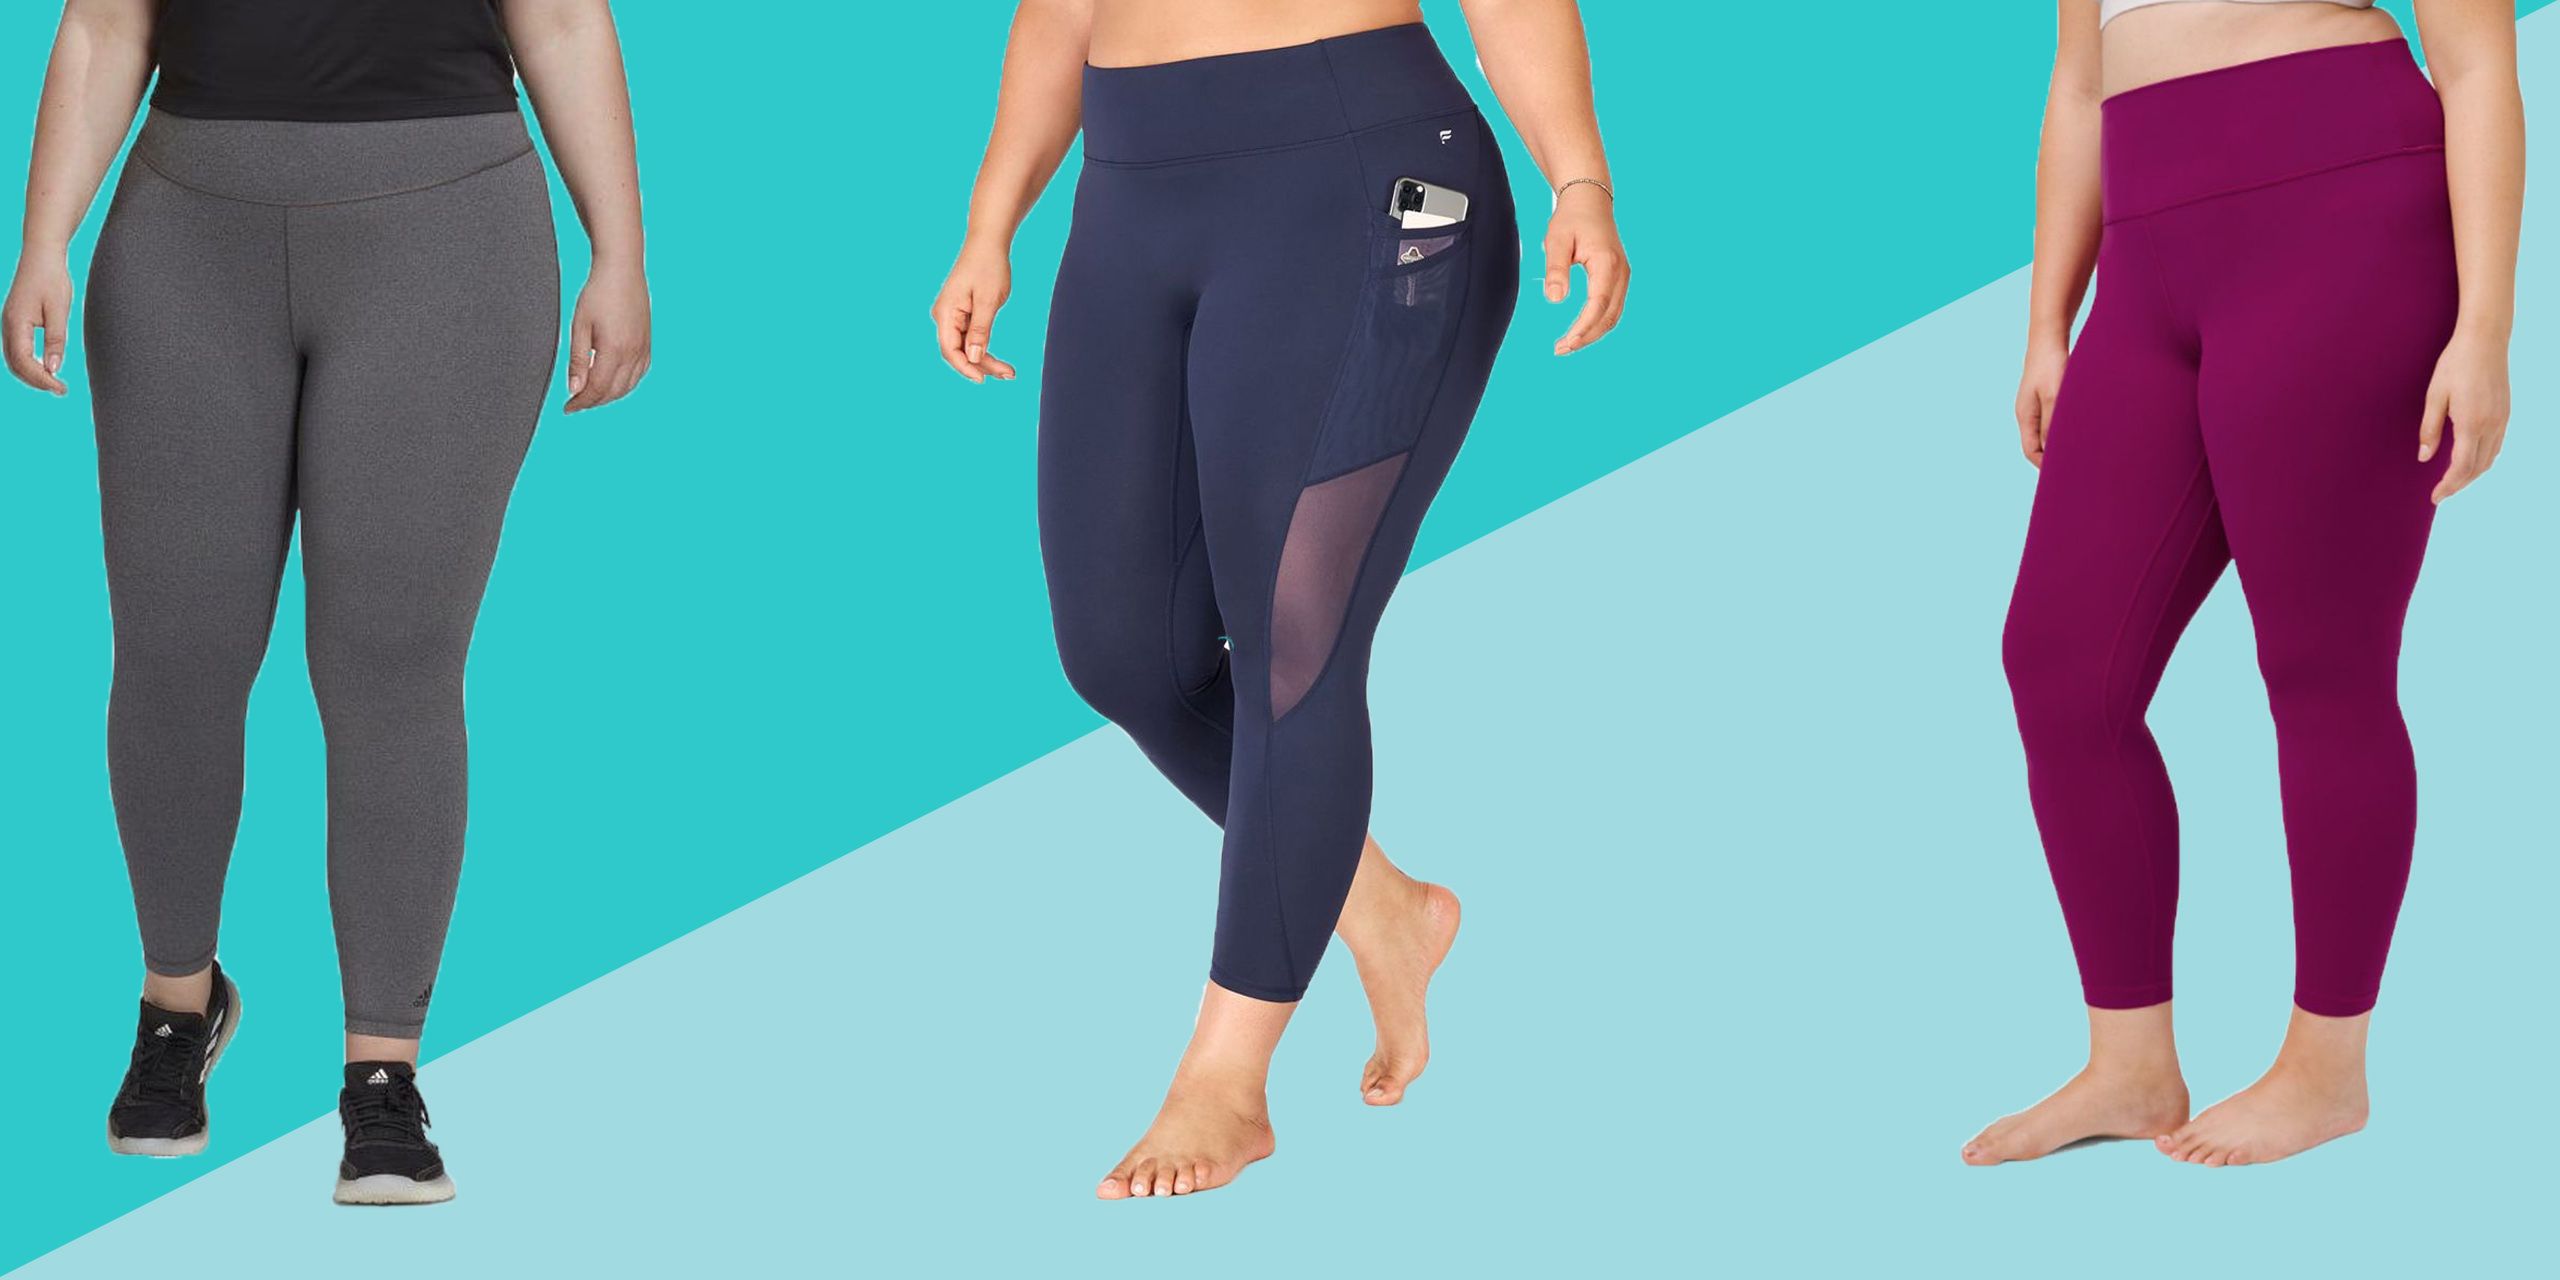 The Lovely Women & Plus Soft Cotton Active Stretch Ankle Length Lightweight Leggings